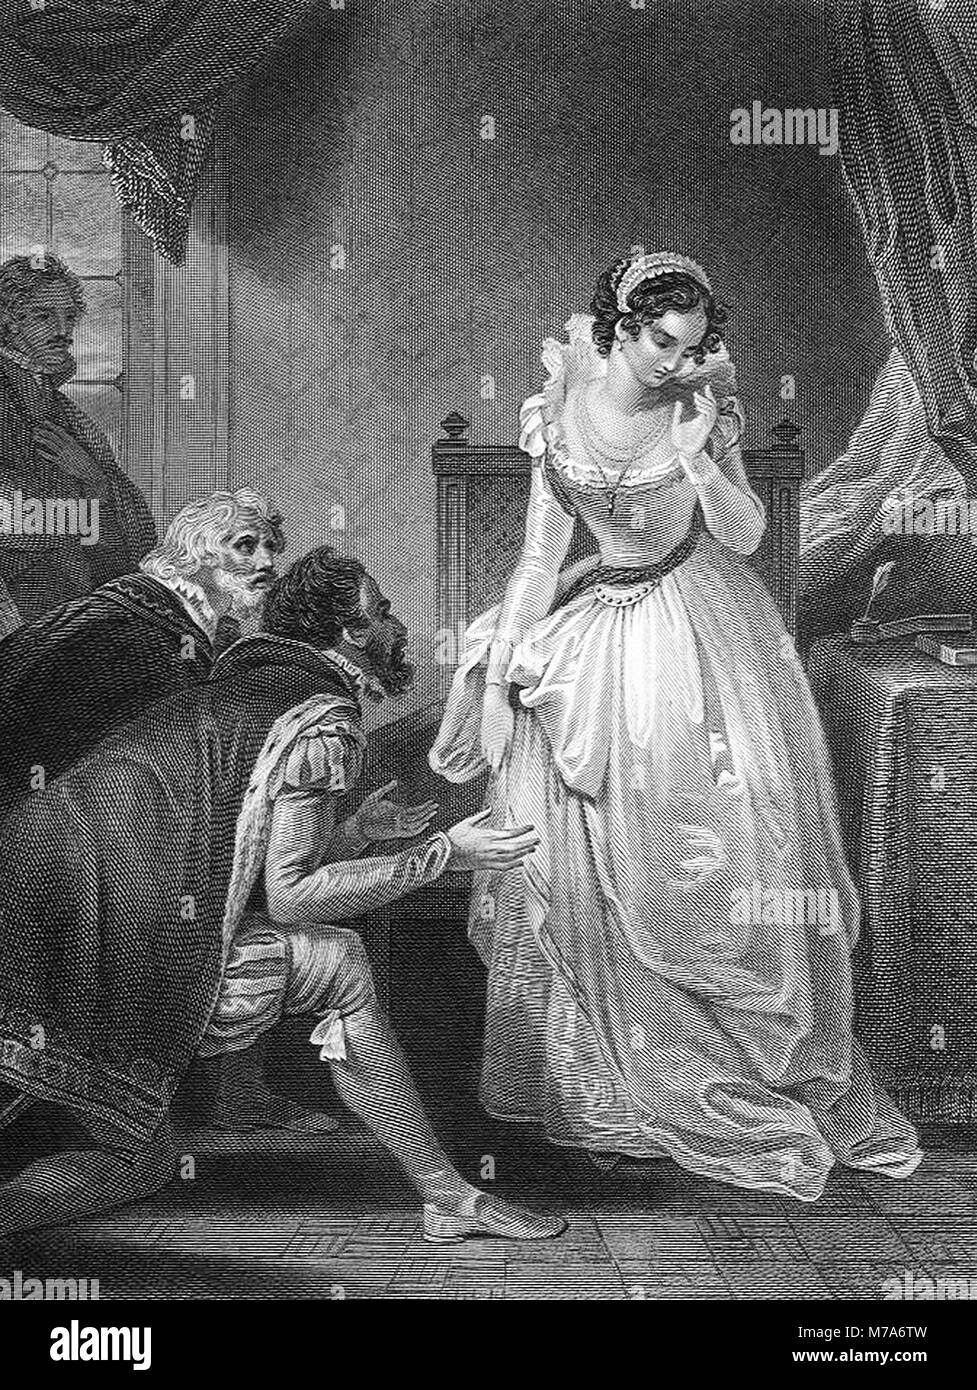 Lady Jane Grey refusing the Crown. Lady Jane Grey reigned as queen of England for 9 days in 1553. Stock Photo